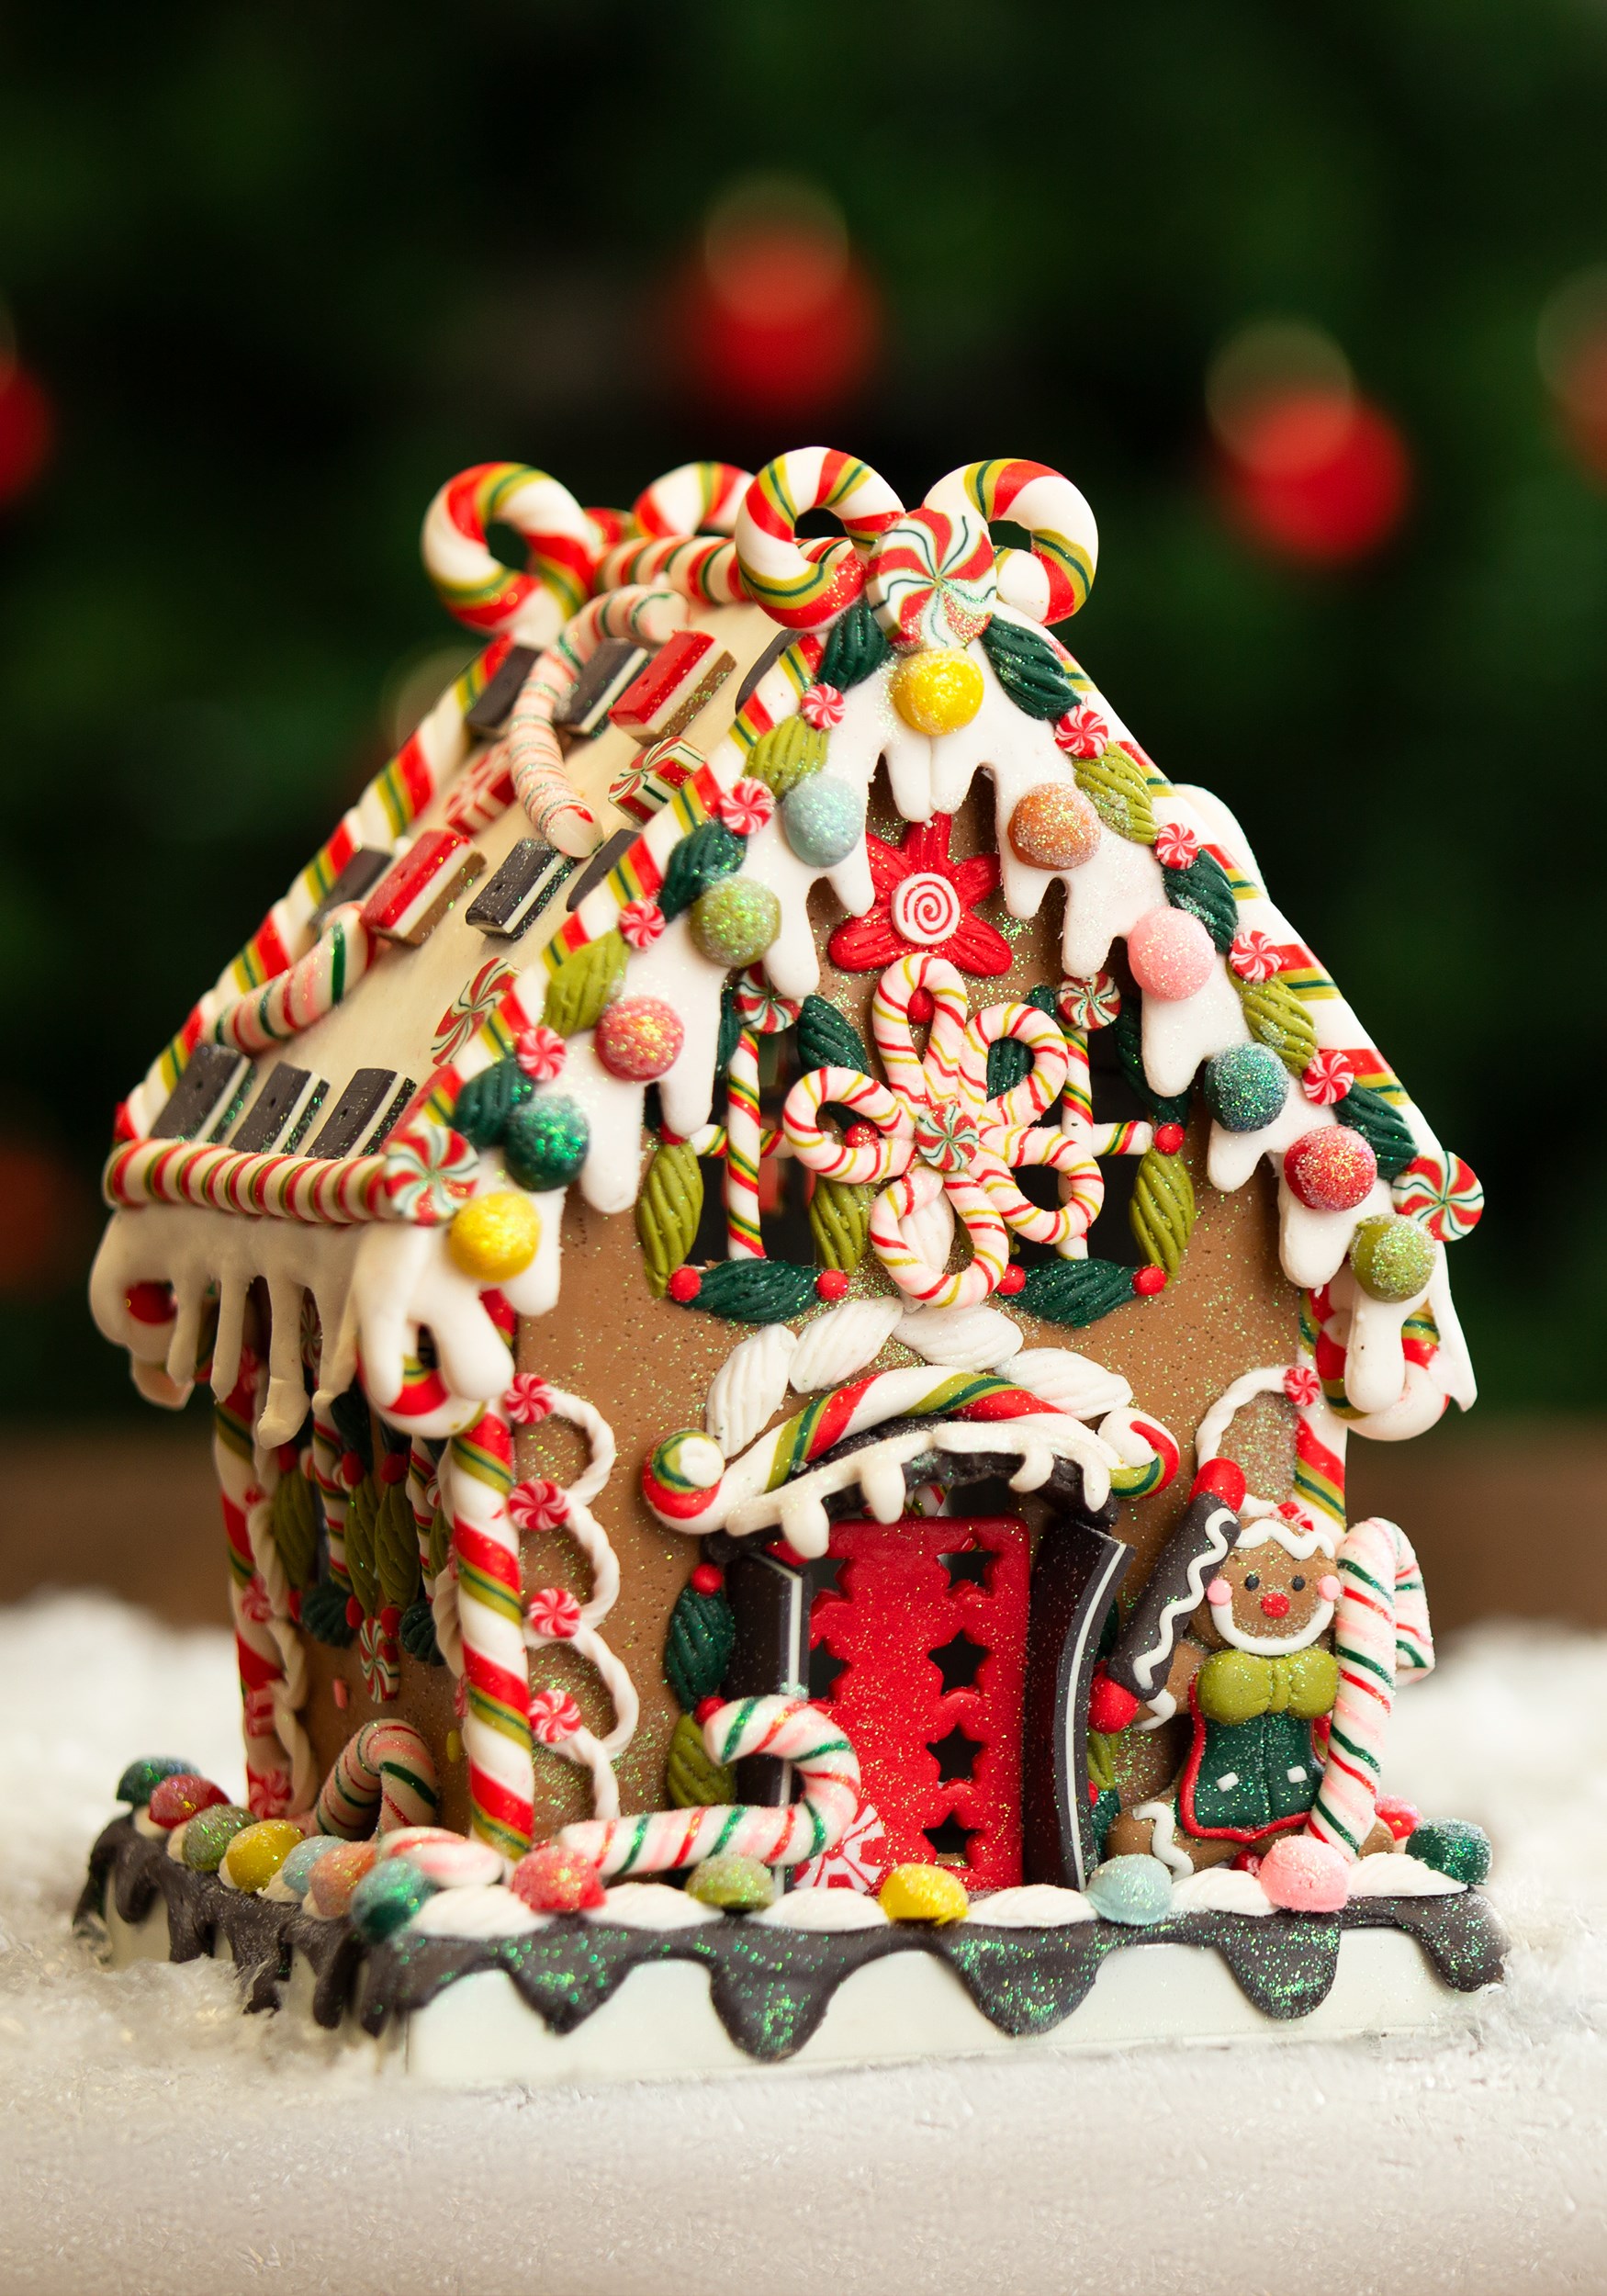 Claydough: 8 Inch Gingerbread House w/ Lights | Christmas Decorations